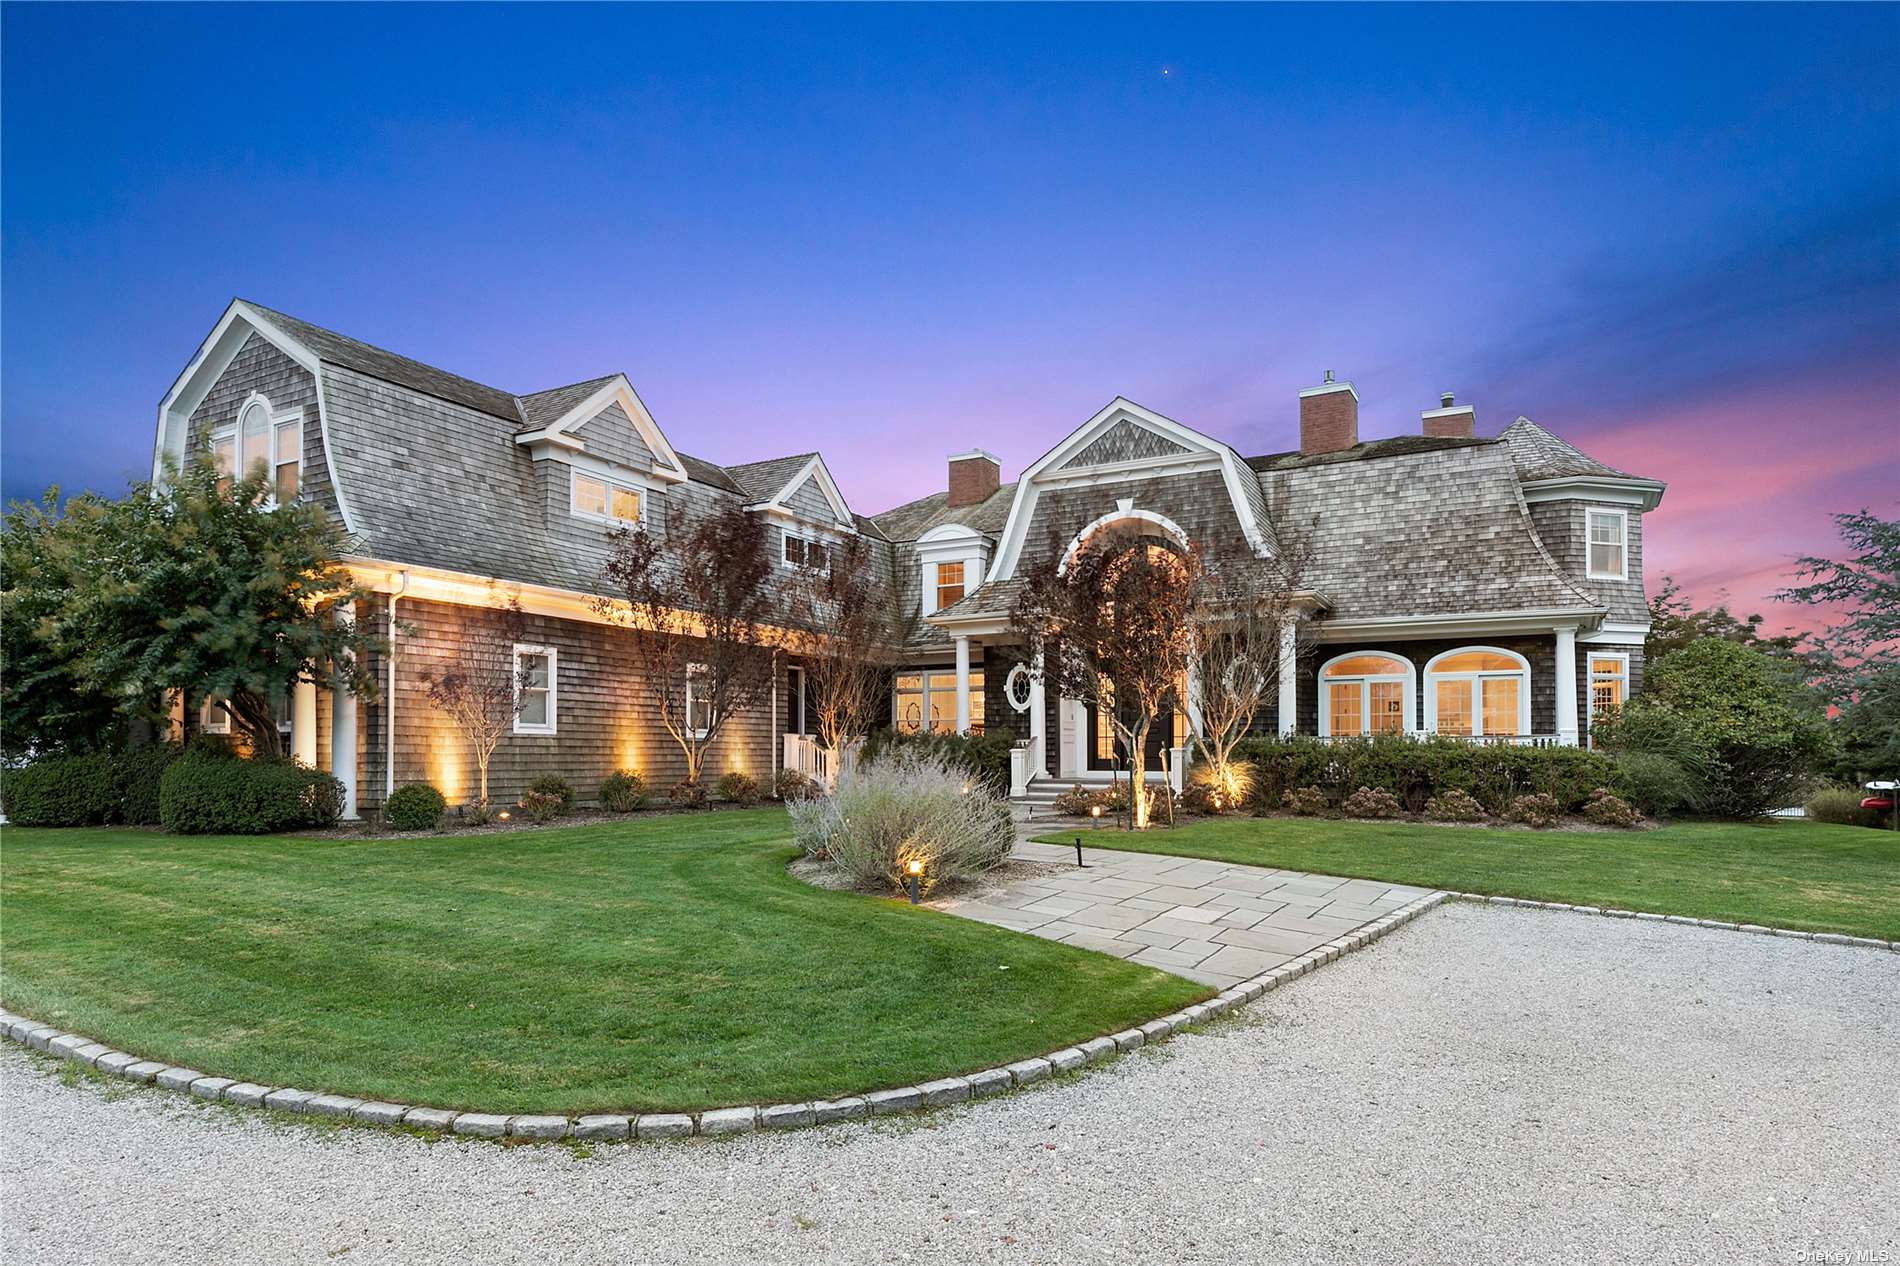 Property for Sale at 101 Jessup Lane, Westhampton Beach, Hamptons, NY - Bedrooms: 7 
Bathrooms: 9  - $9,995,000